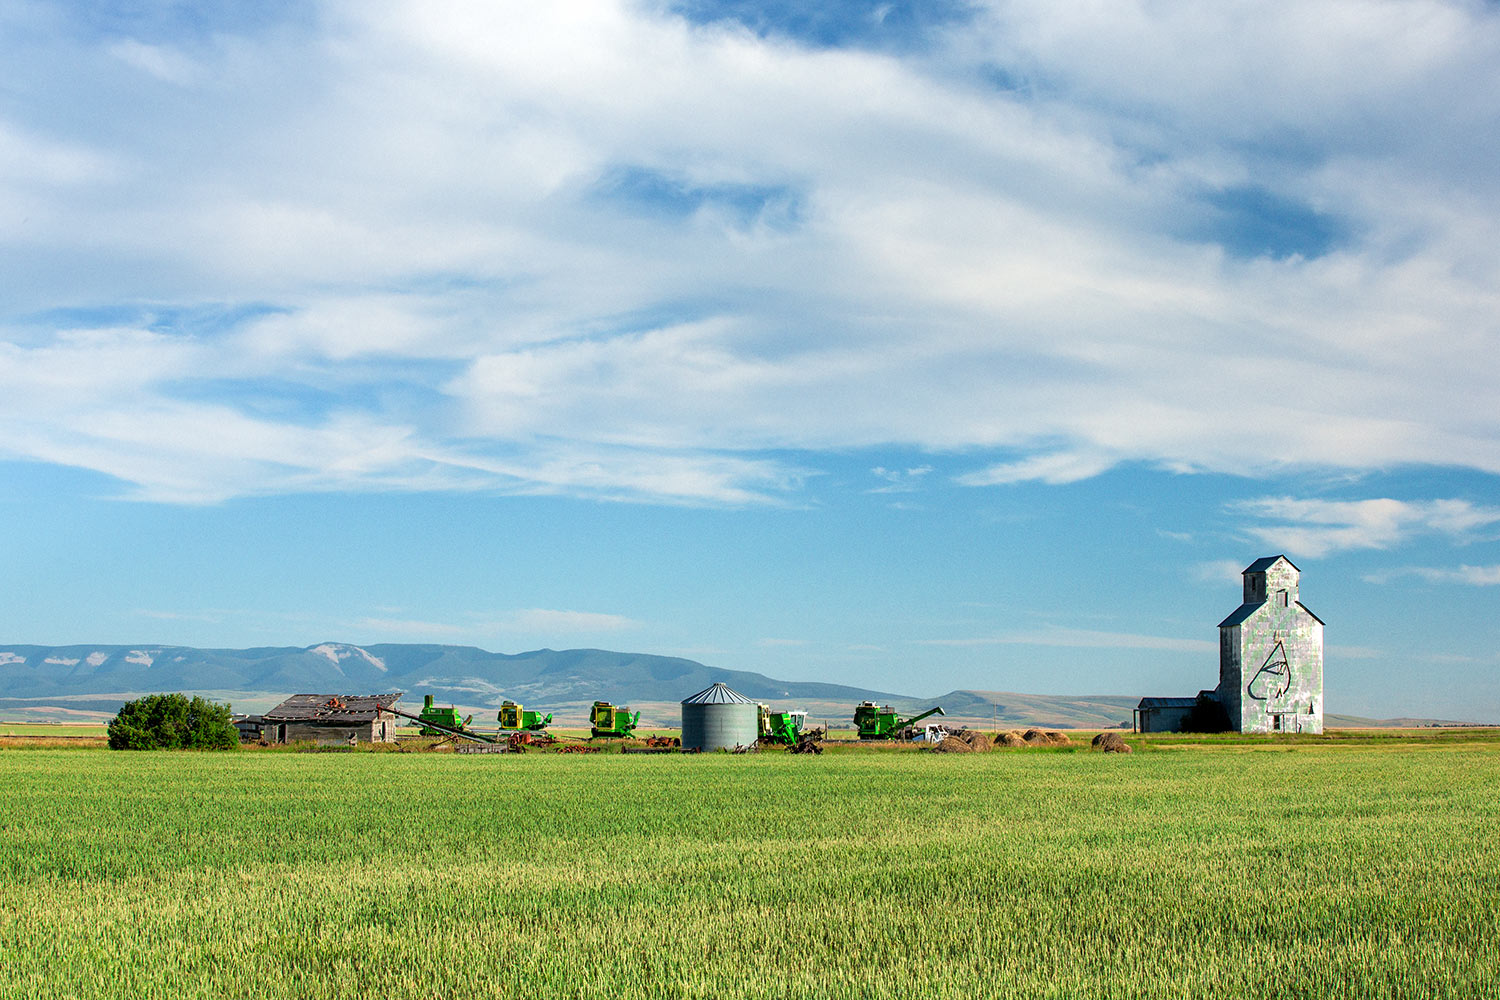 A row of farm machinery and a grain elevator in the former railroad town called Ross Fork, Montana.&nbsp;→ Buy a Print